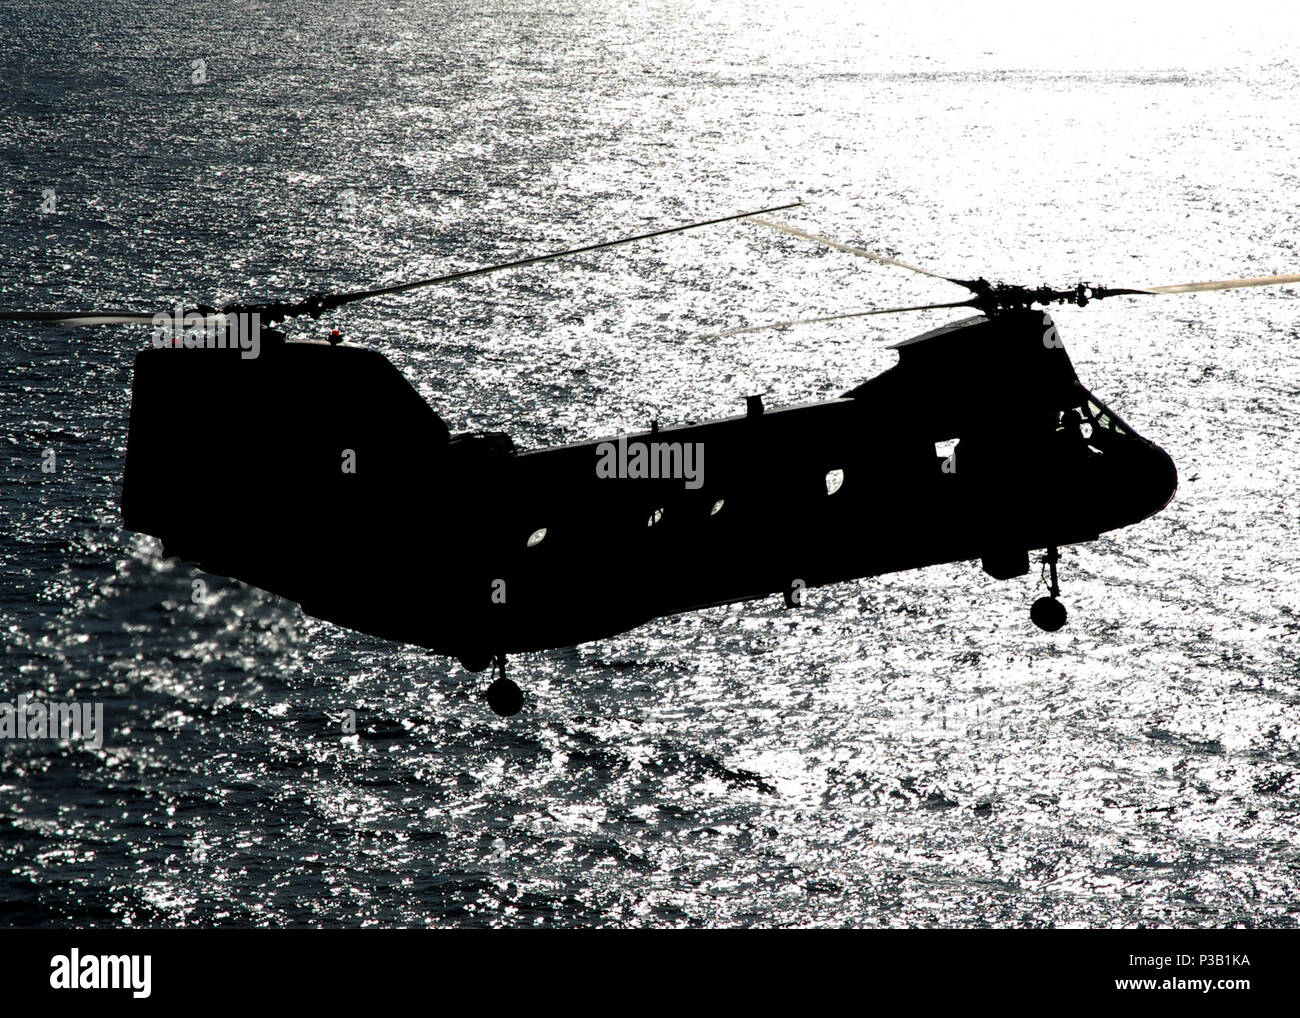 OCEAN (Nov. 3, 2008) A CH-53E Super Stallion helicopter approaches the amphibious assault ship USS Peleliu (LHA 5) during operations to disembark Marines after a scheduled six-month deployment. Peleliu is the flagship of the Peleliu Expeditionary Strike Group. Stock Photo